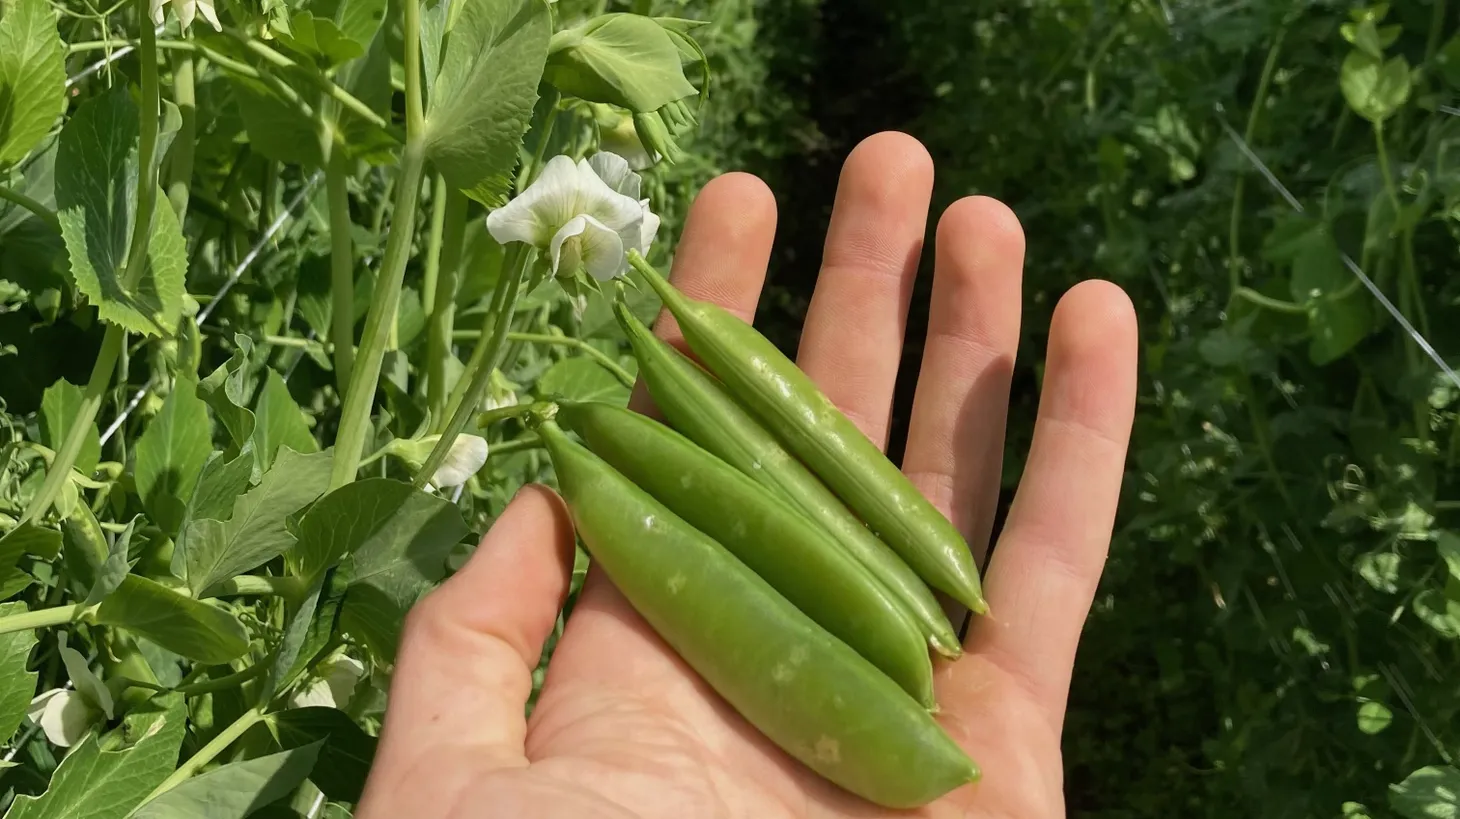 2 Peas In A Pod, located in Arroyo Grande in San Luis Obispo County, was the first to grow sugar snap peas.